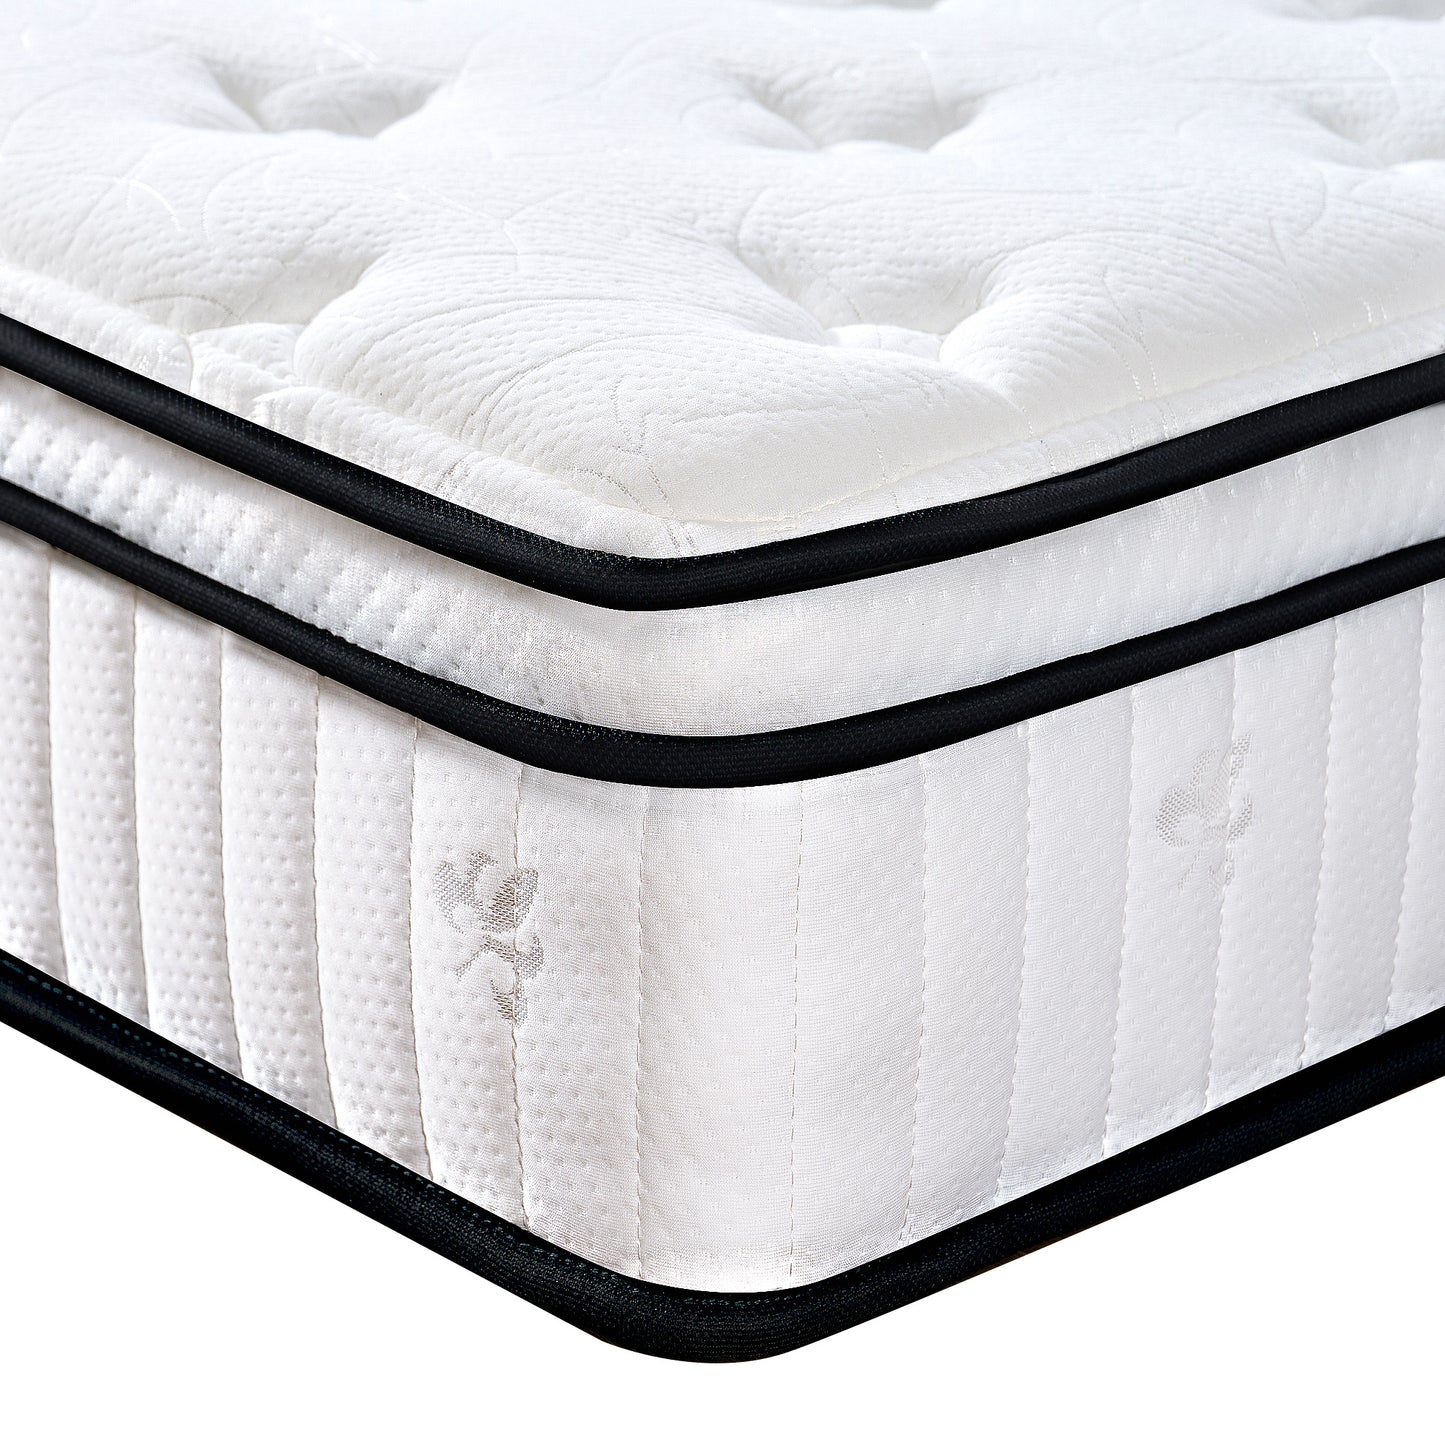 SogesPower 10inches Thickness Hybrid Mattress Gel Memory Foam- Queen, White